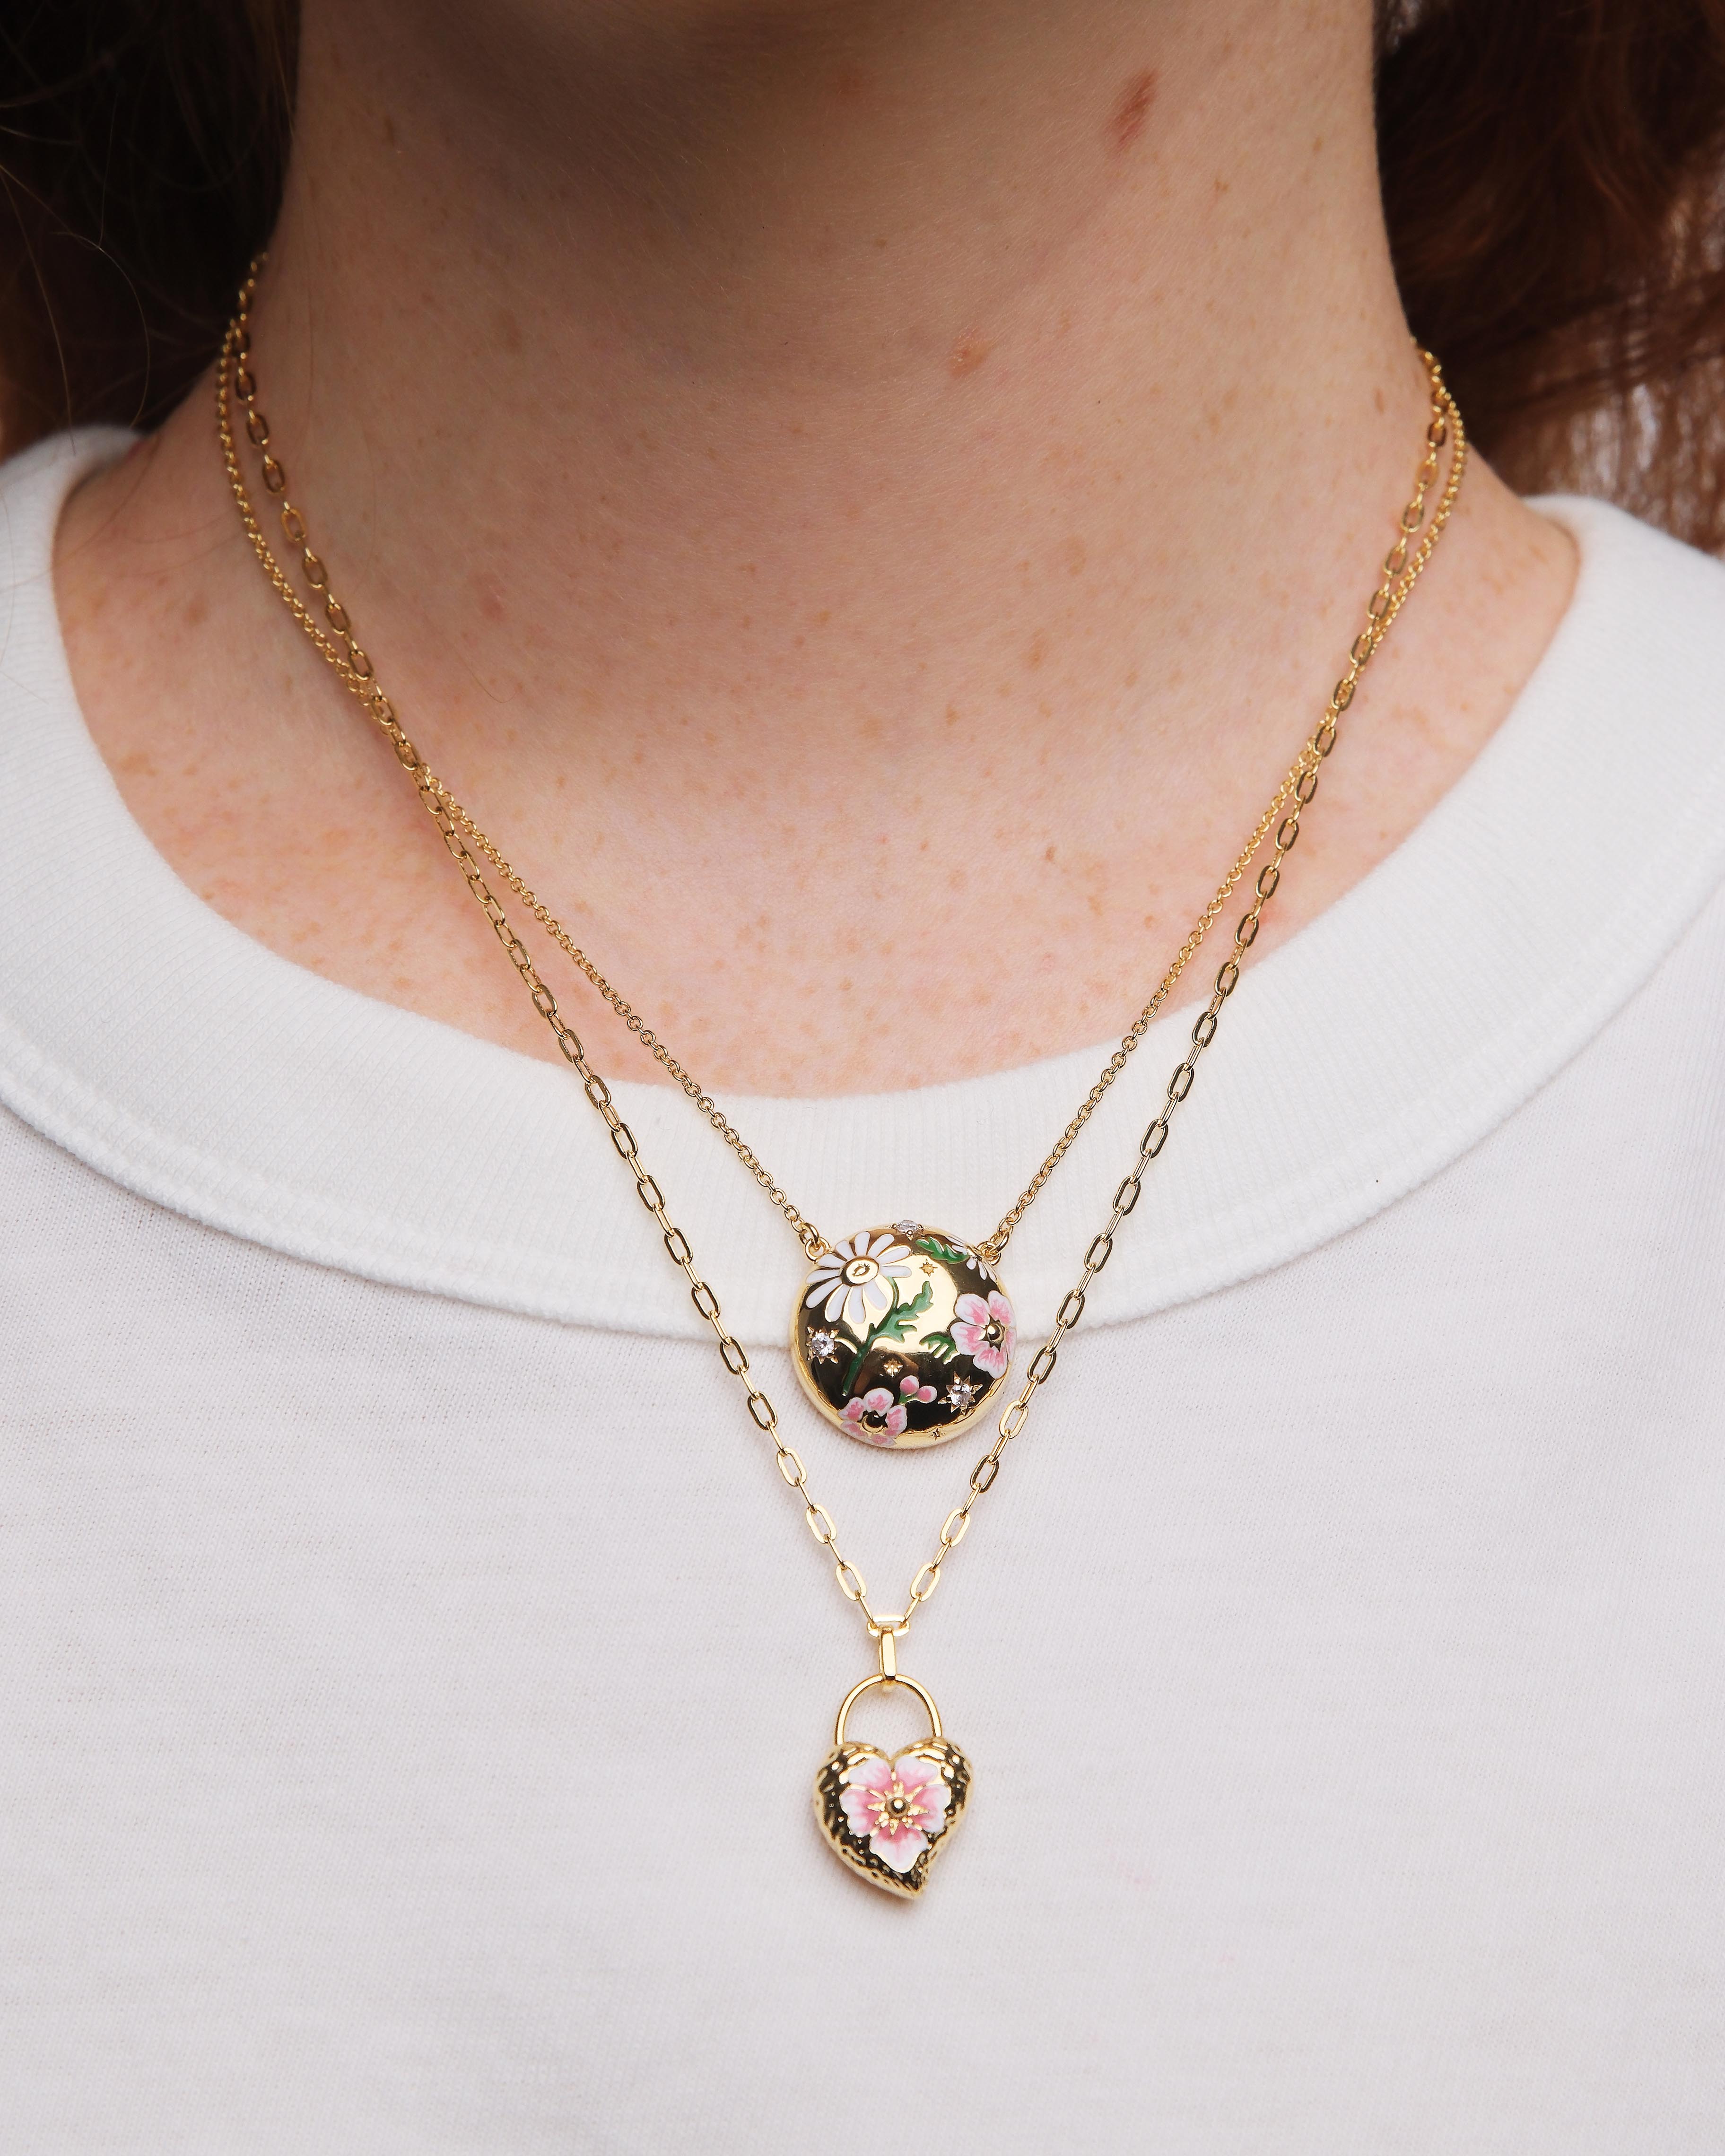 Daisy and pansy flower pendant necklace